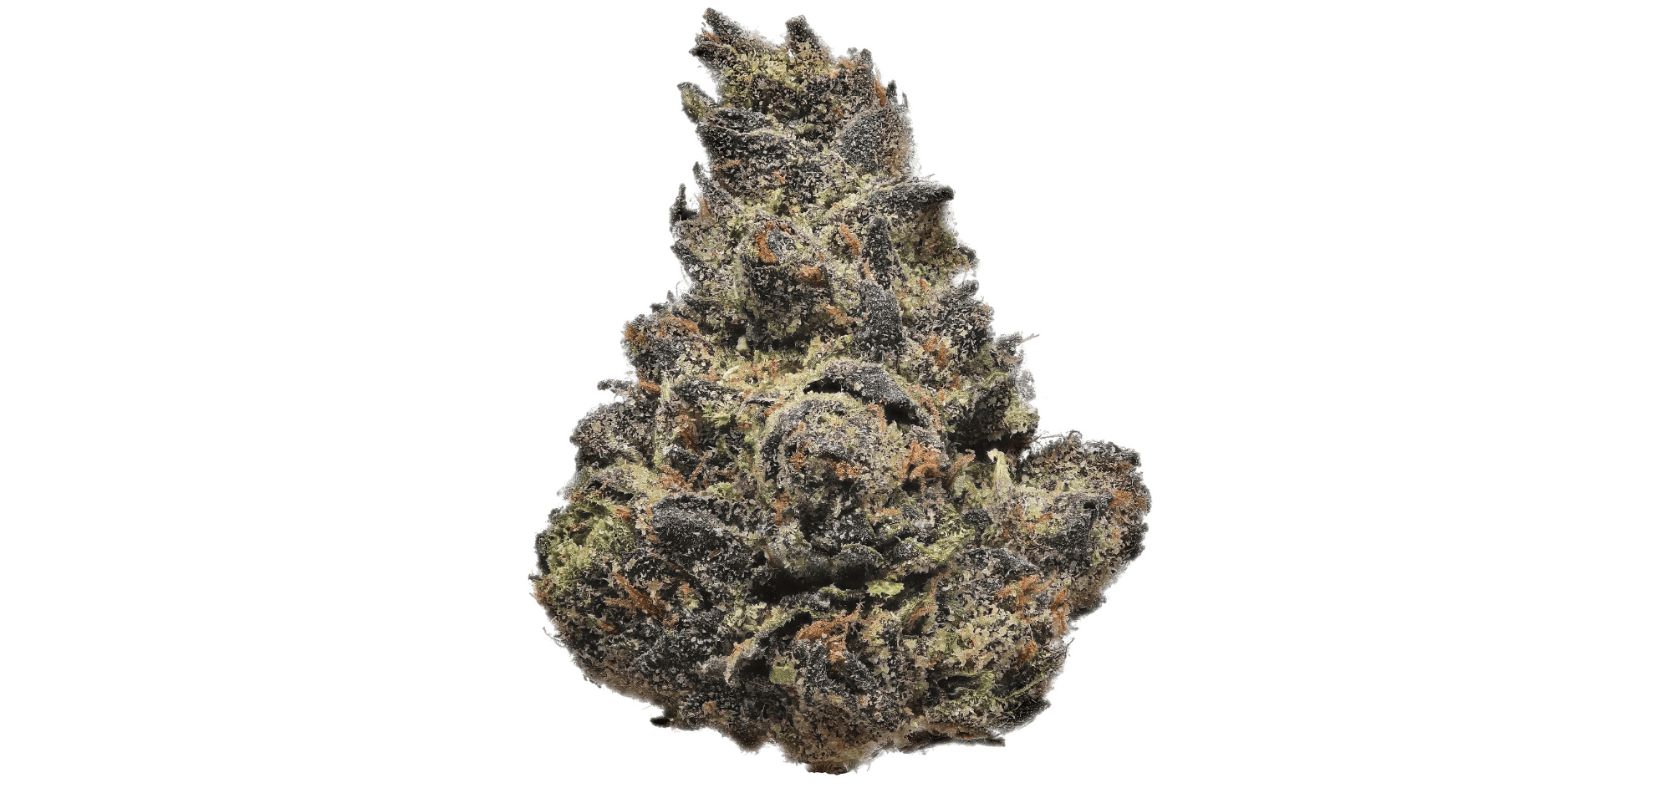 Now that you know what Ice Cream Cake weed strain is, you must be wondering where you can buy it online in Canada.